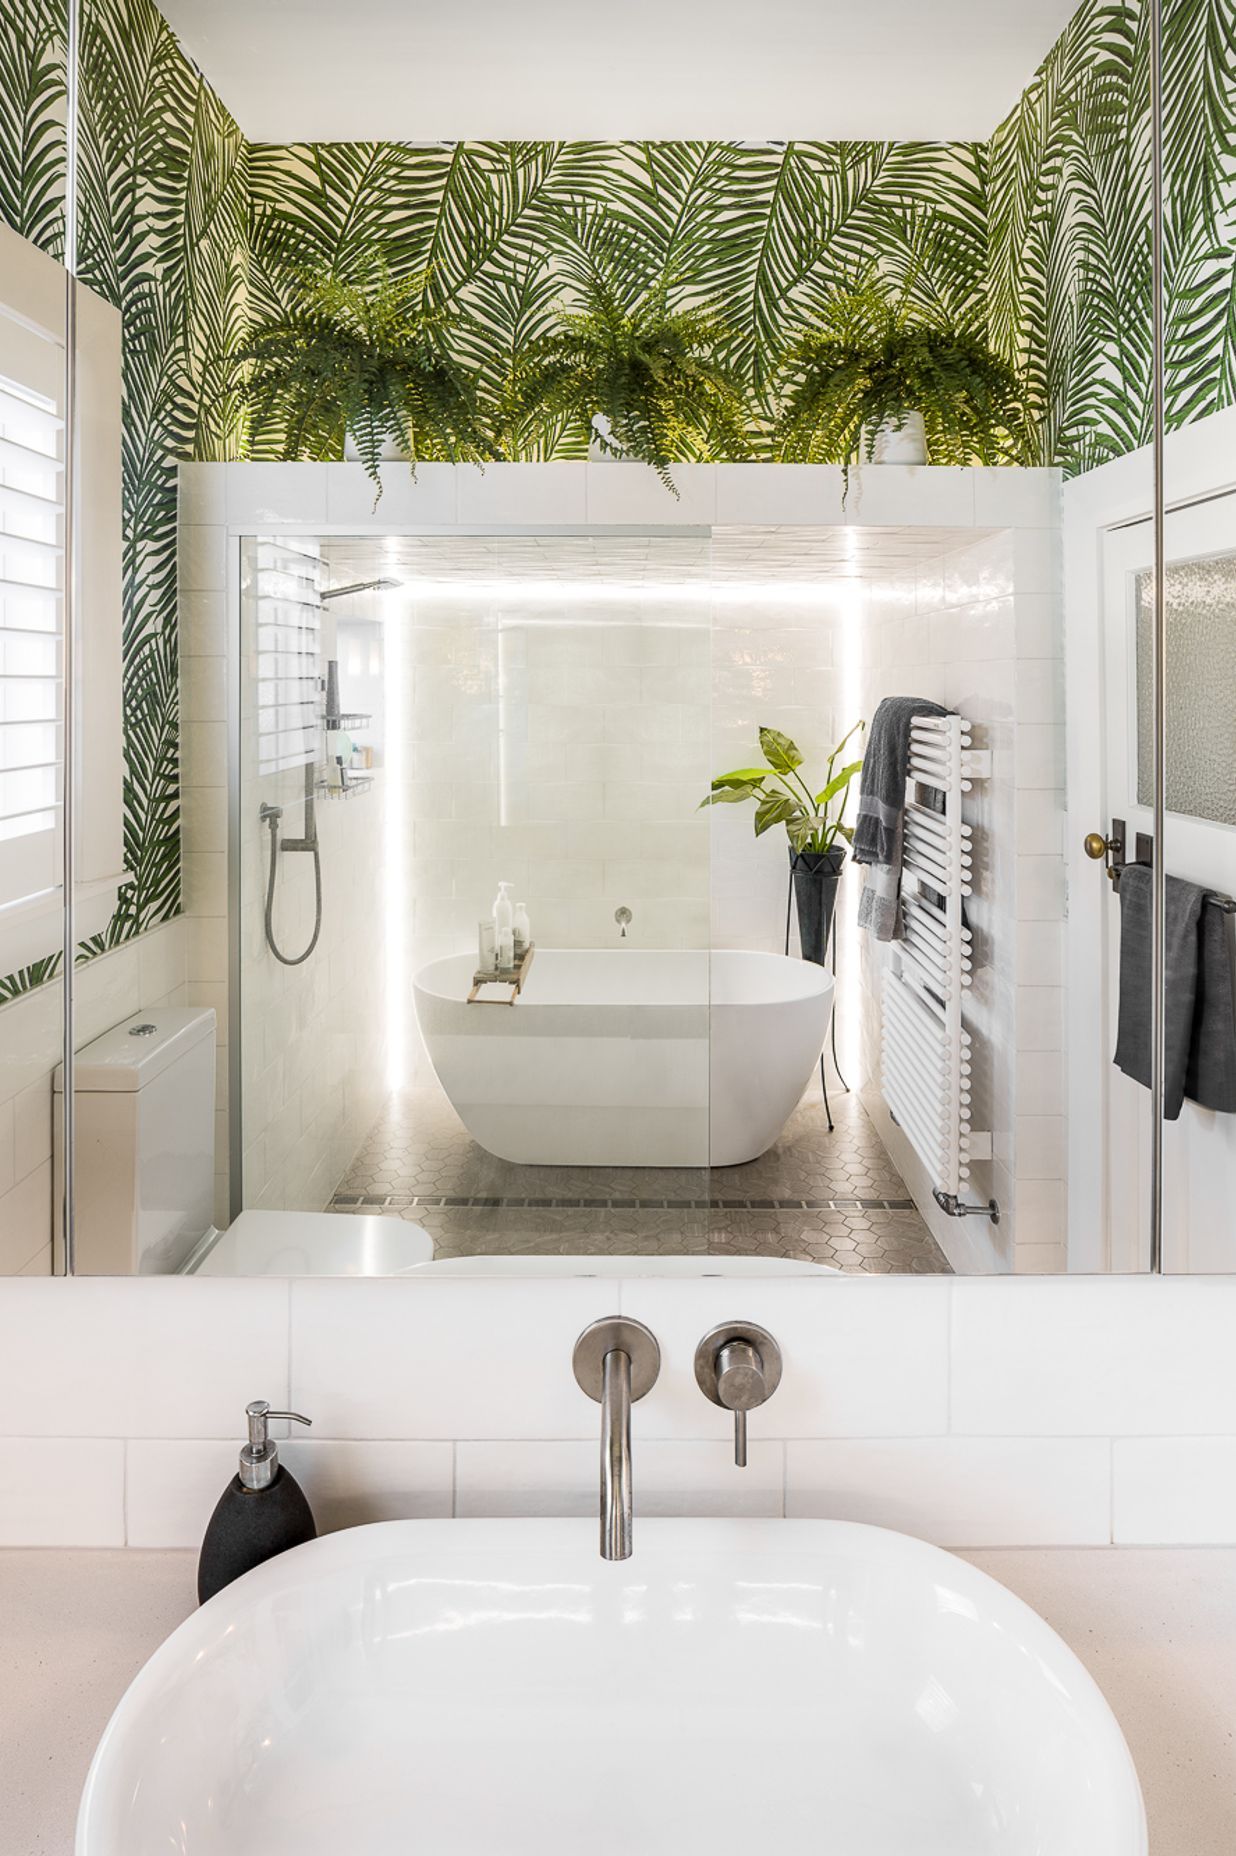 A neutral palette in the bathroom is invigorated with a wallpaper patterned with emerald green palms.